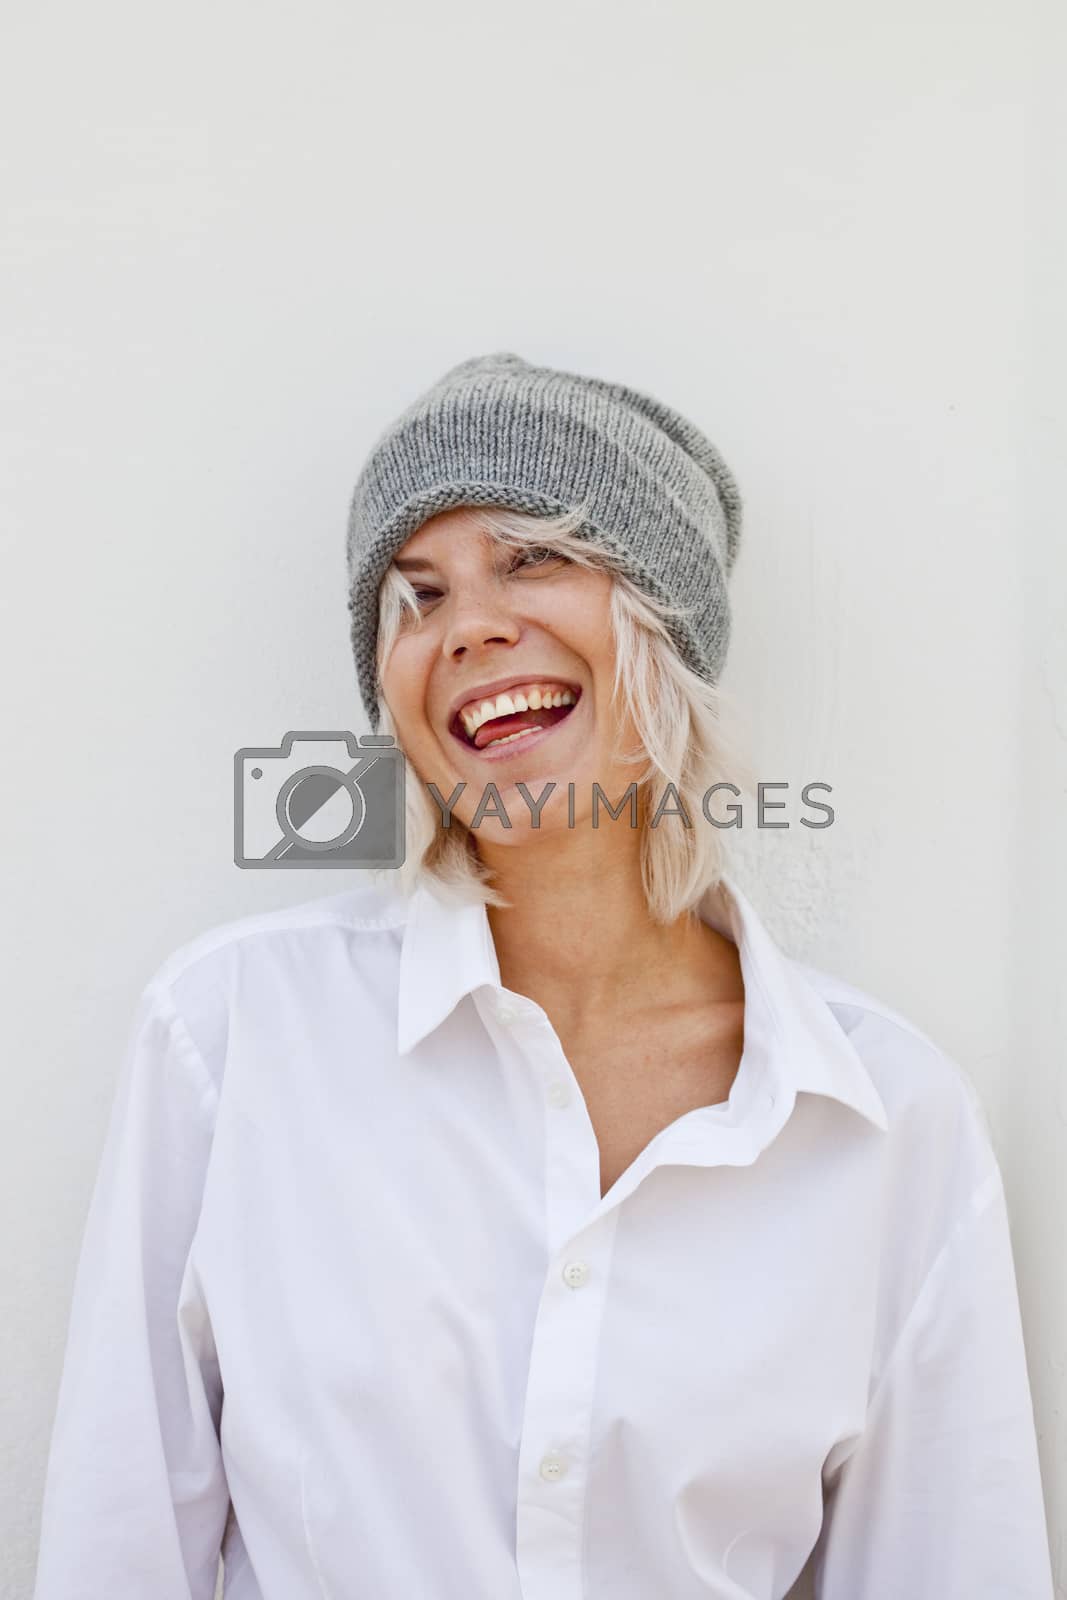 Royalty free image of Beautiful happy young woman in warm grey beanie. by marylooo